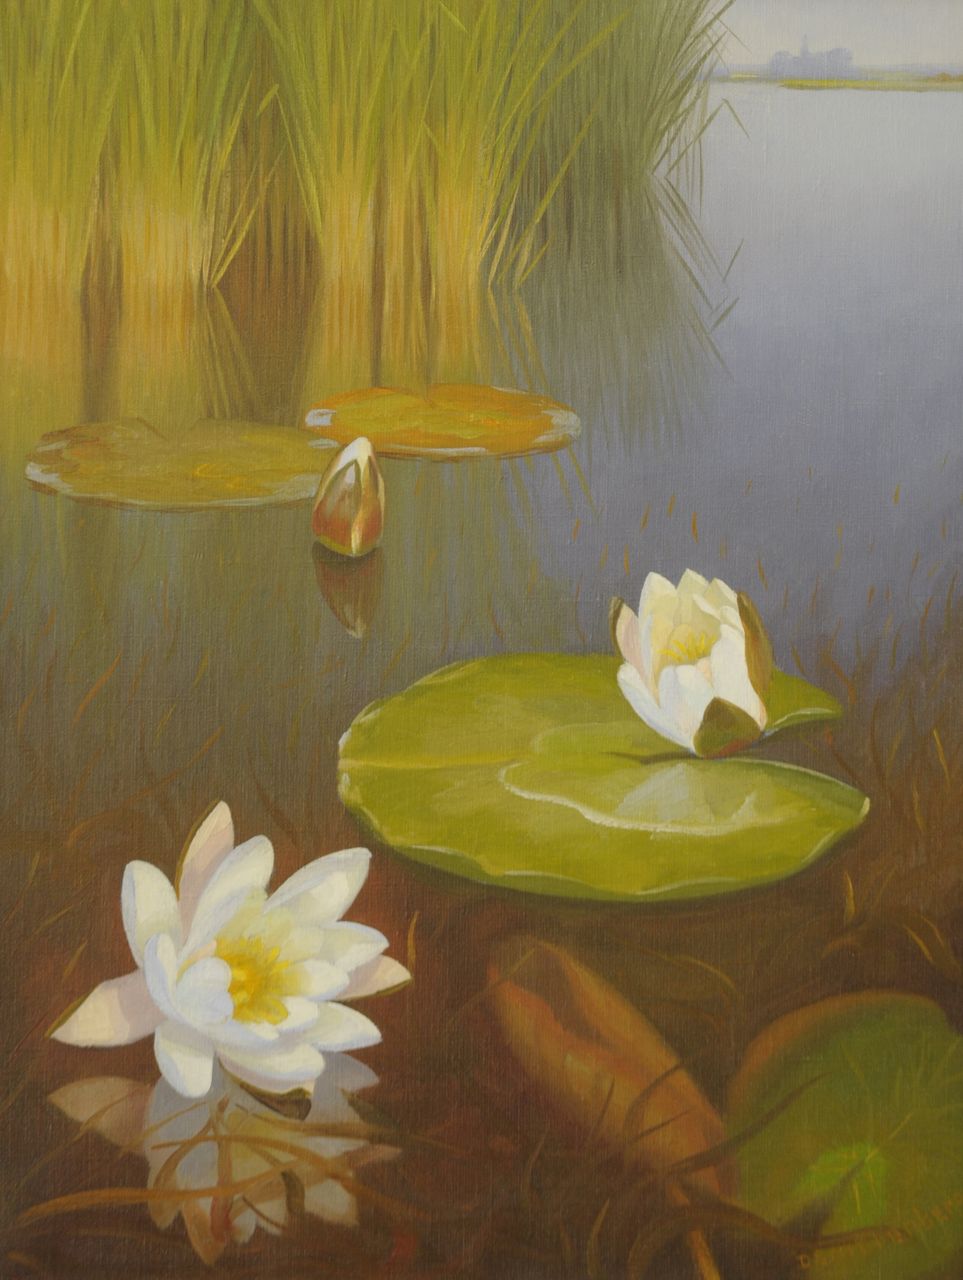 Smorenberg D.  | Dirk Smorenberg | Paintings offered for sale | The Loosdrechtse Plassen with water lilies, oil on canvas 50.5 x 39.0 cm, signed l.r.